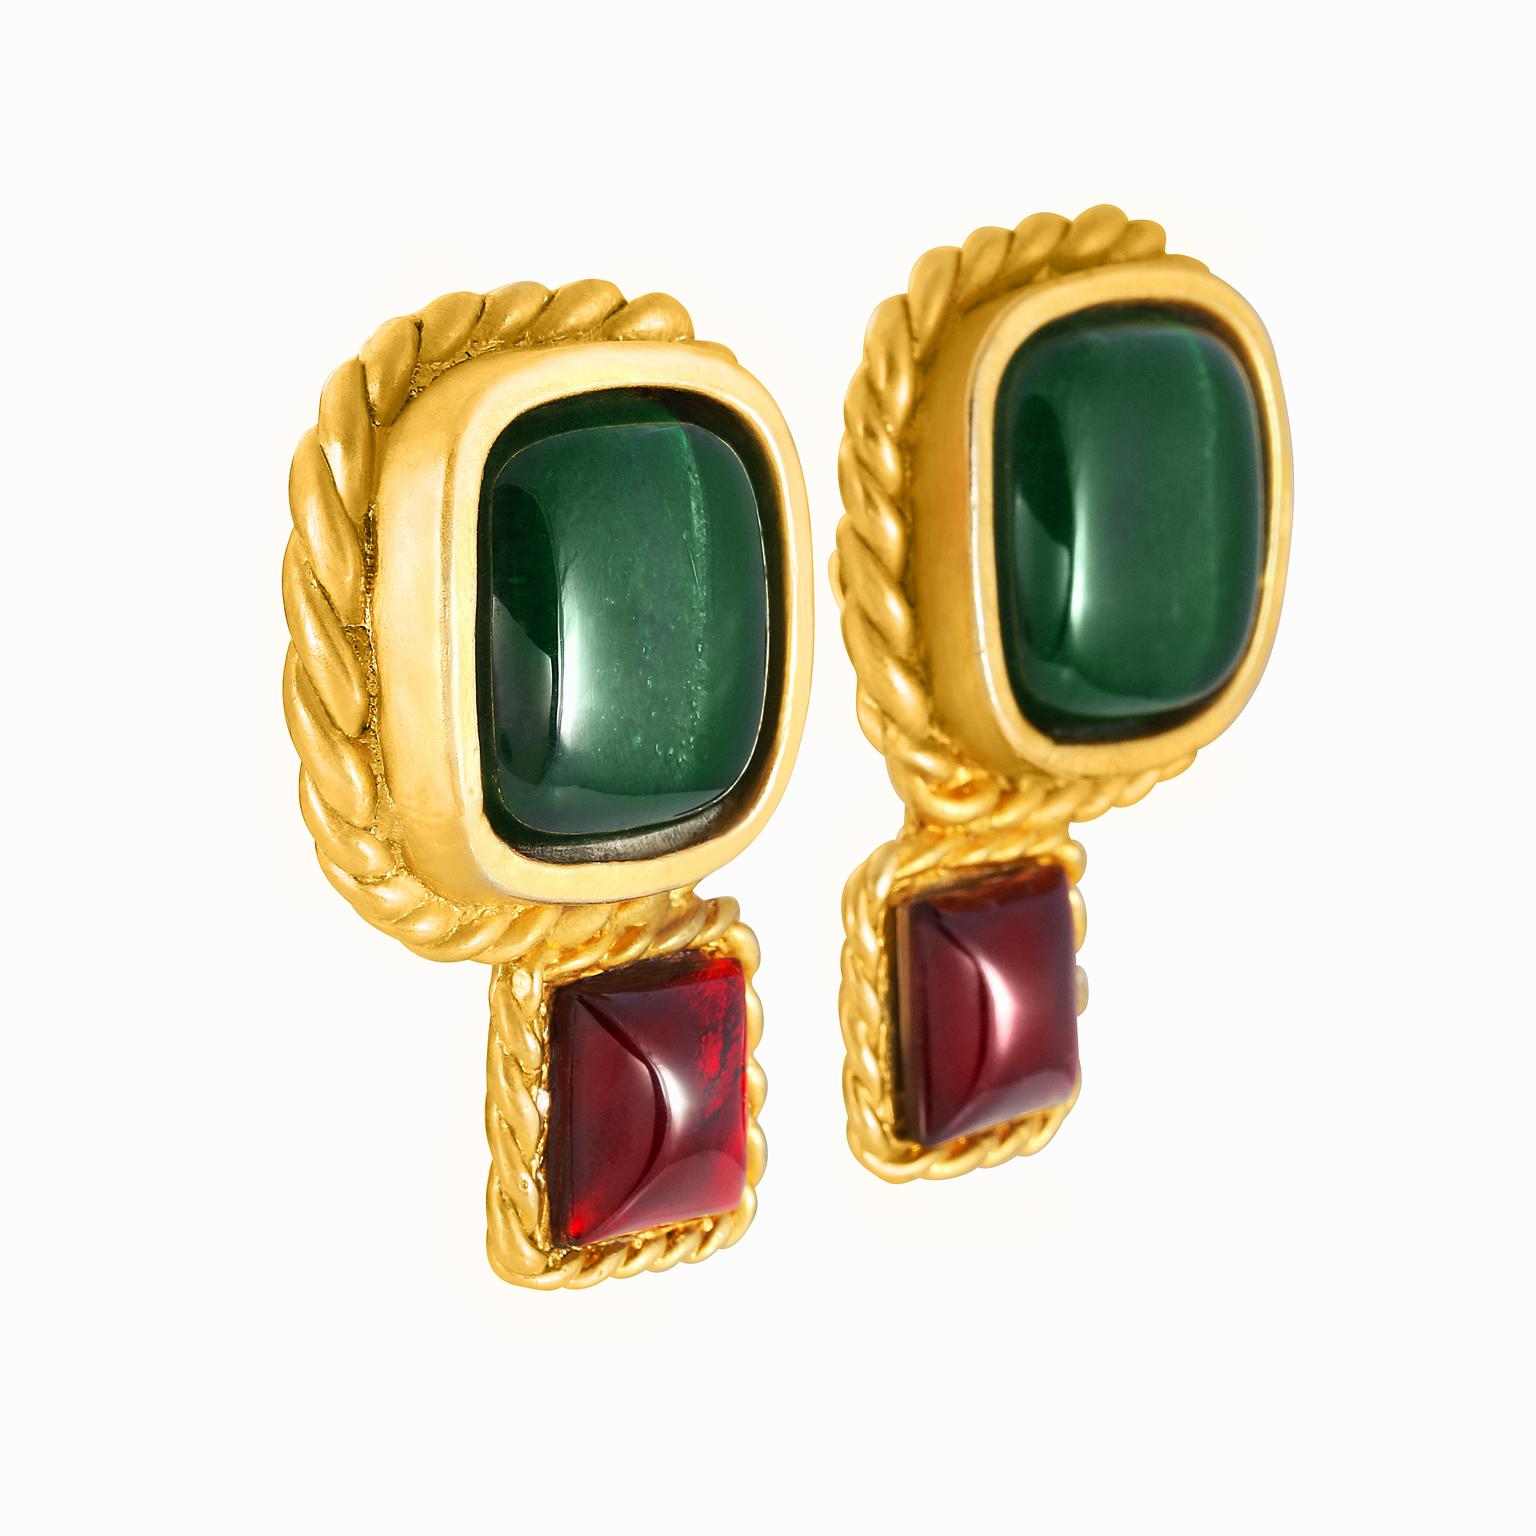 Chanel Lagerfeld Green and Red Gripoix Earrings In Good Condition For Sale In Palm Beach, FL